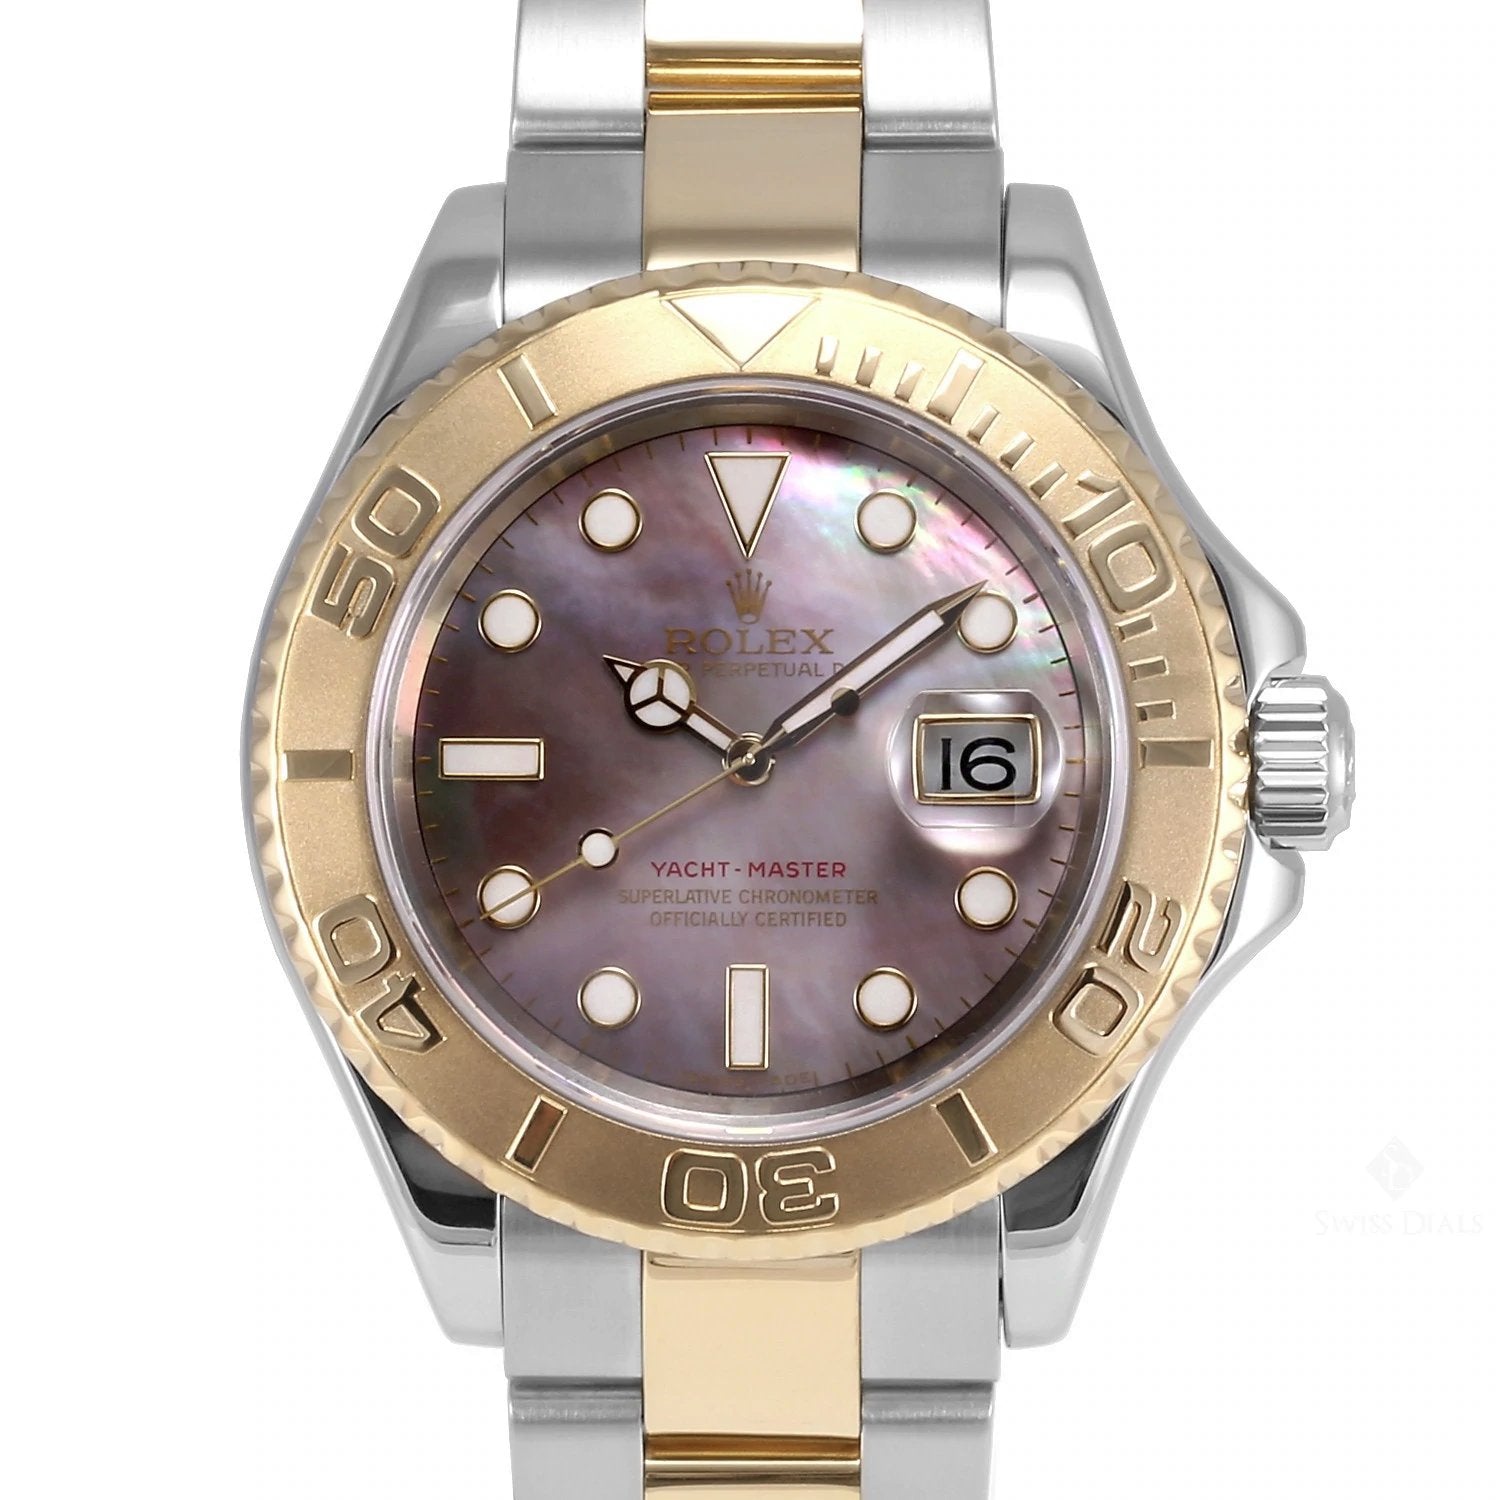 Ladies Rolex 29mm Two Tone 18K Gold Yachtmaster Watch with Black Mother of Pearl Dial and Rotatable Bezel. (Pre-Owned)